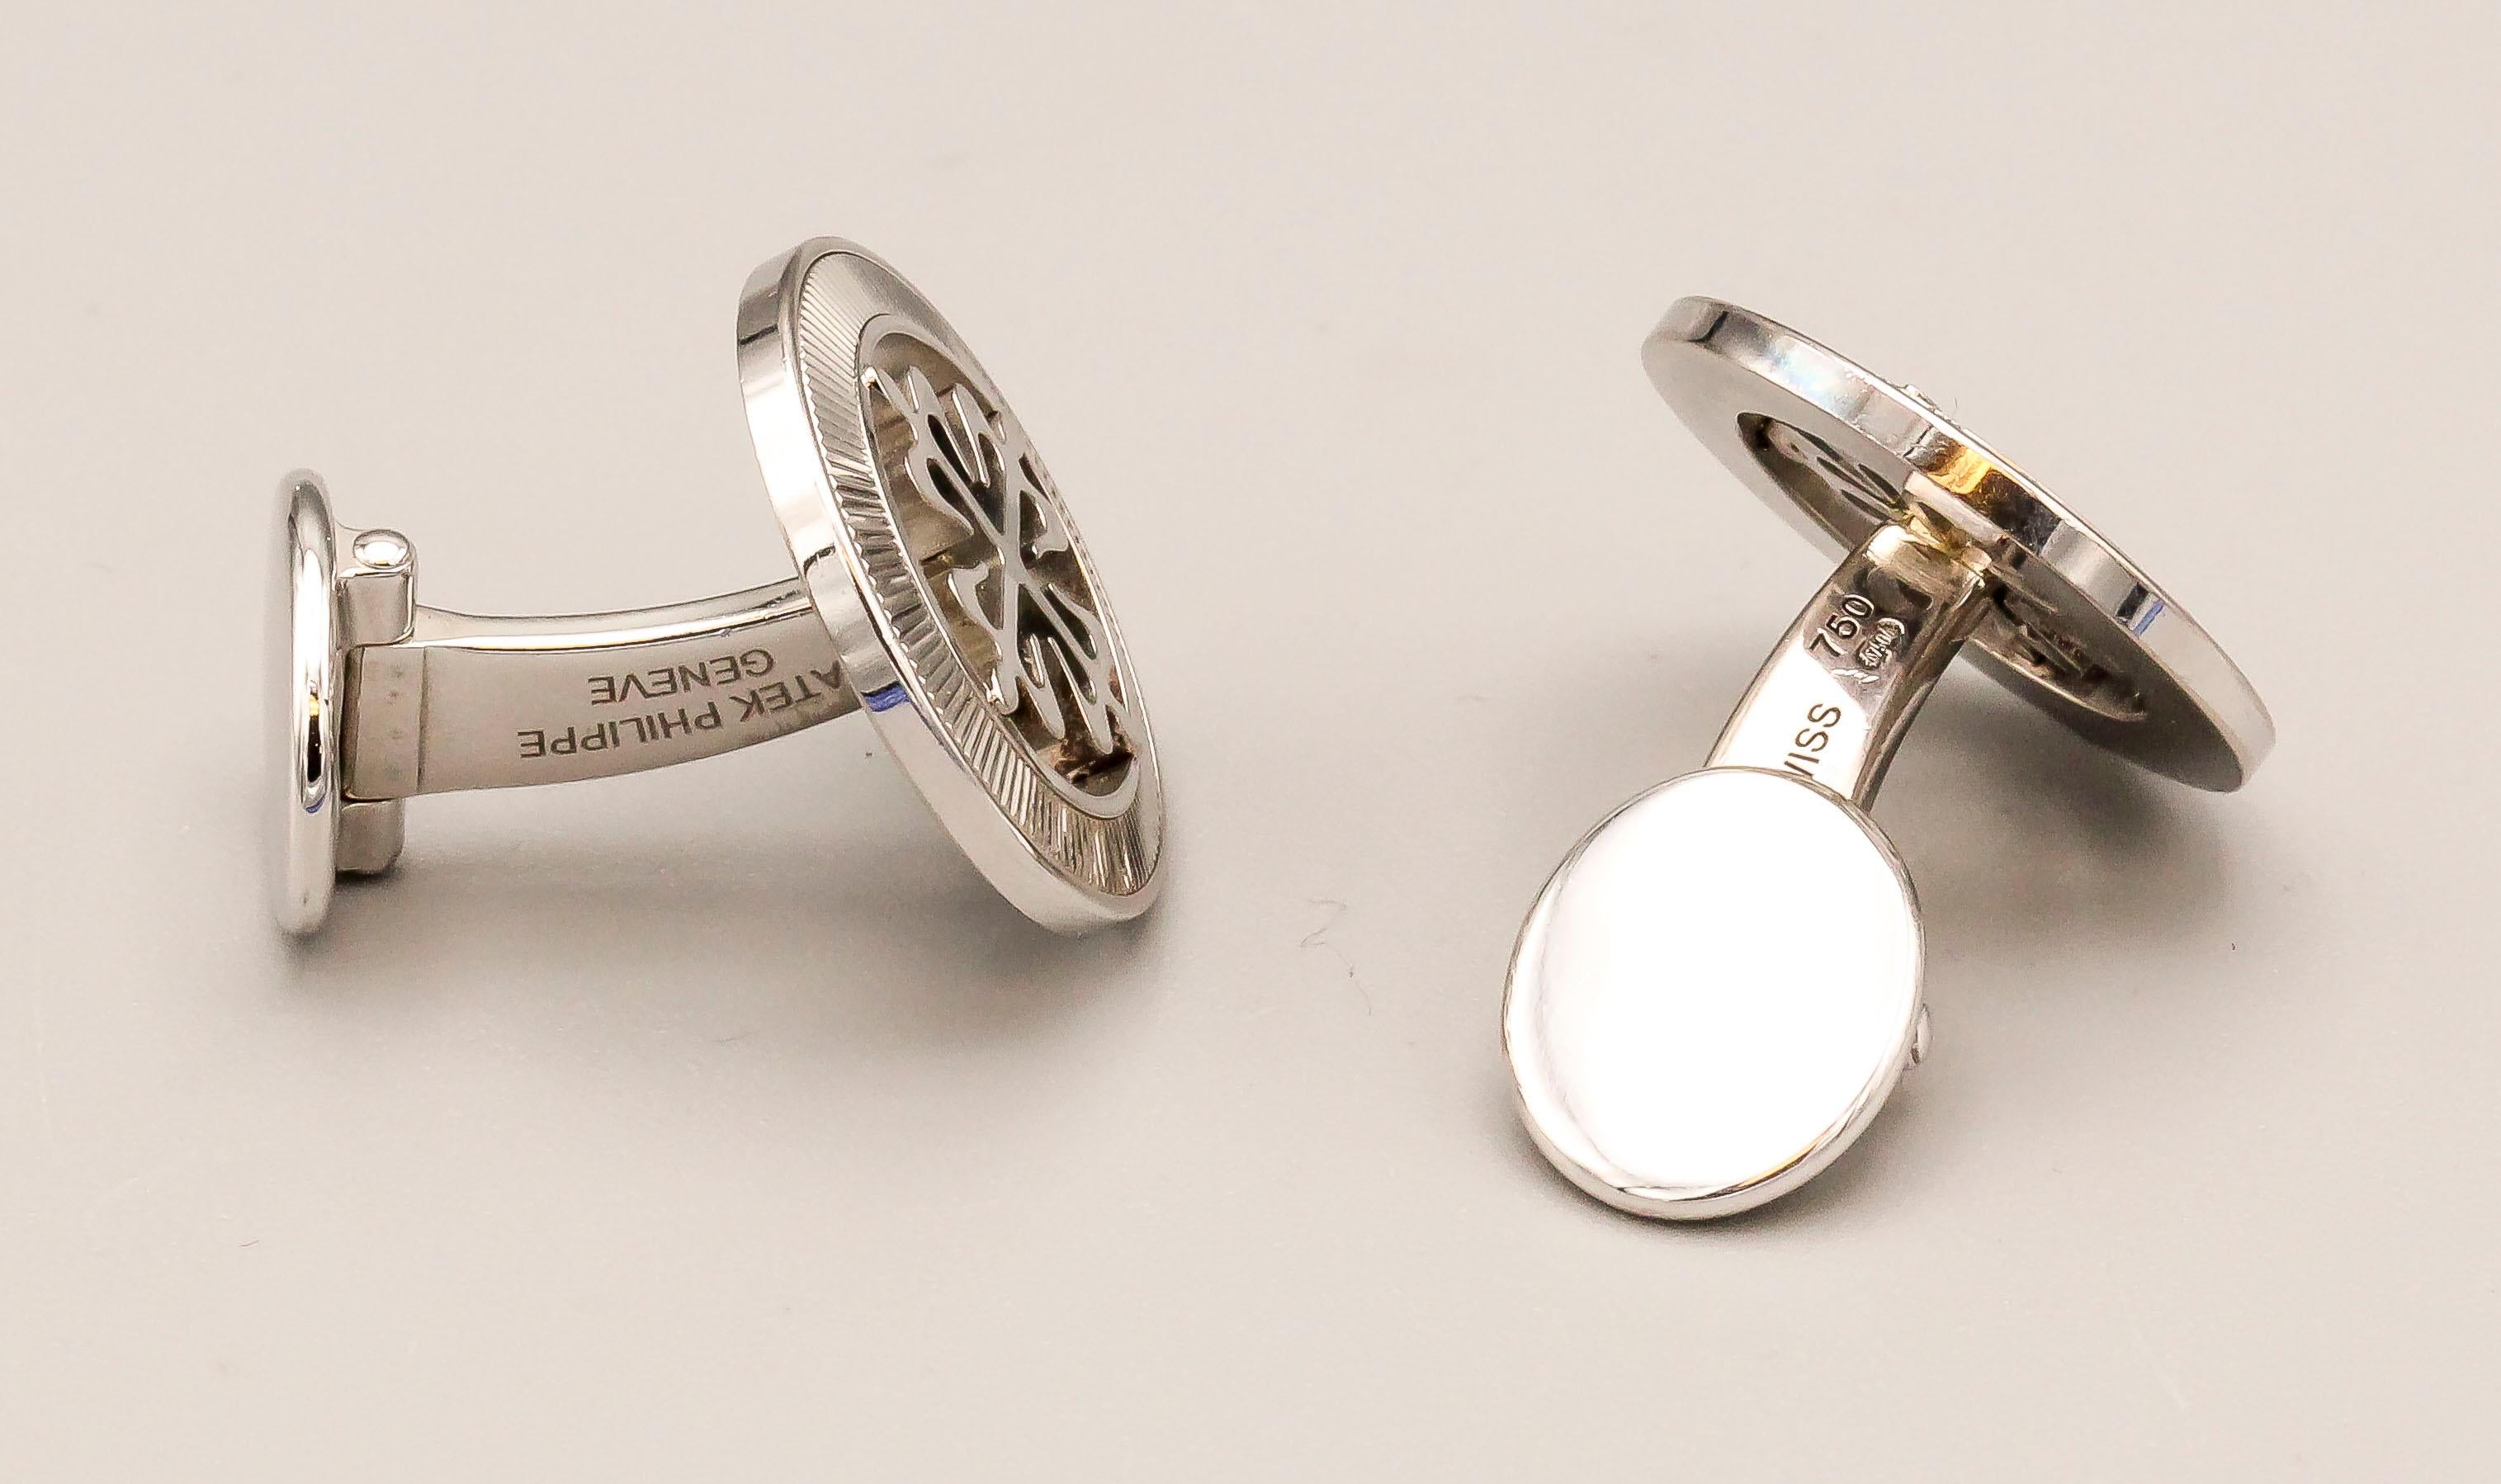 Fine pair of 18K white gold cross cufflinks, from the 